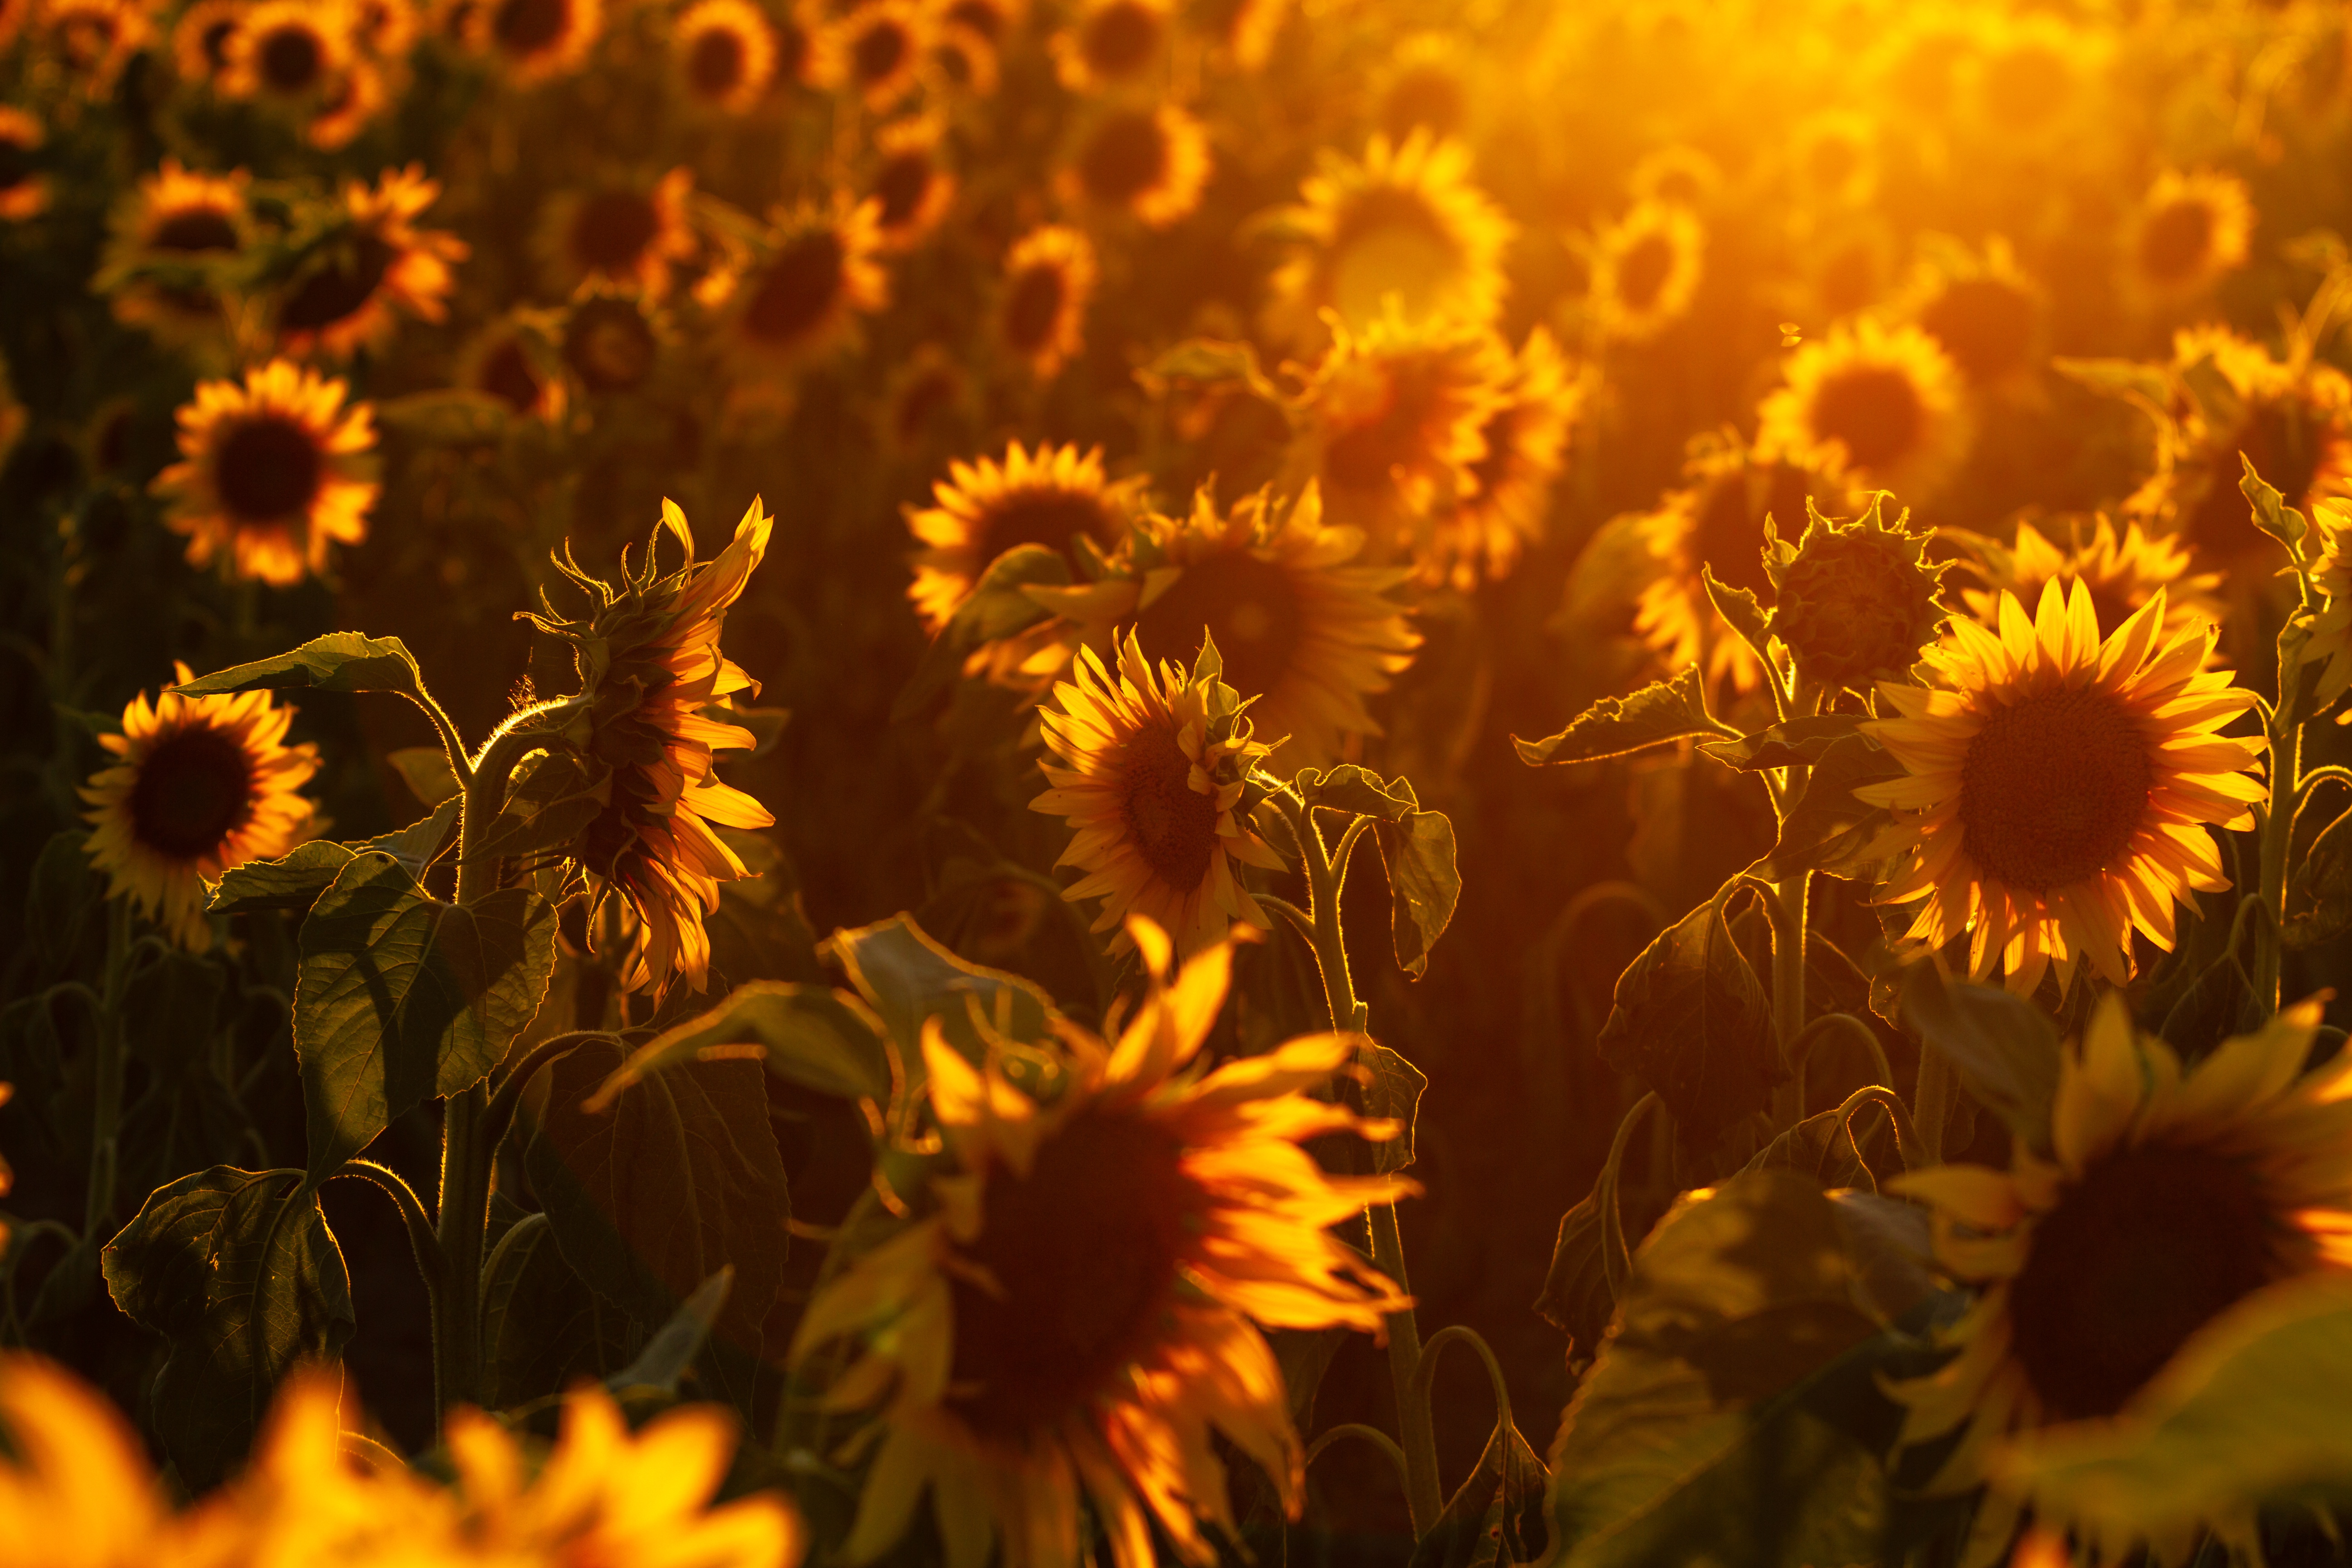 Earth Sunflower HD Wallpaper Background Image. 